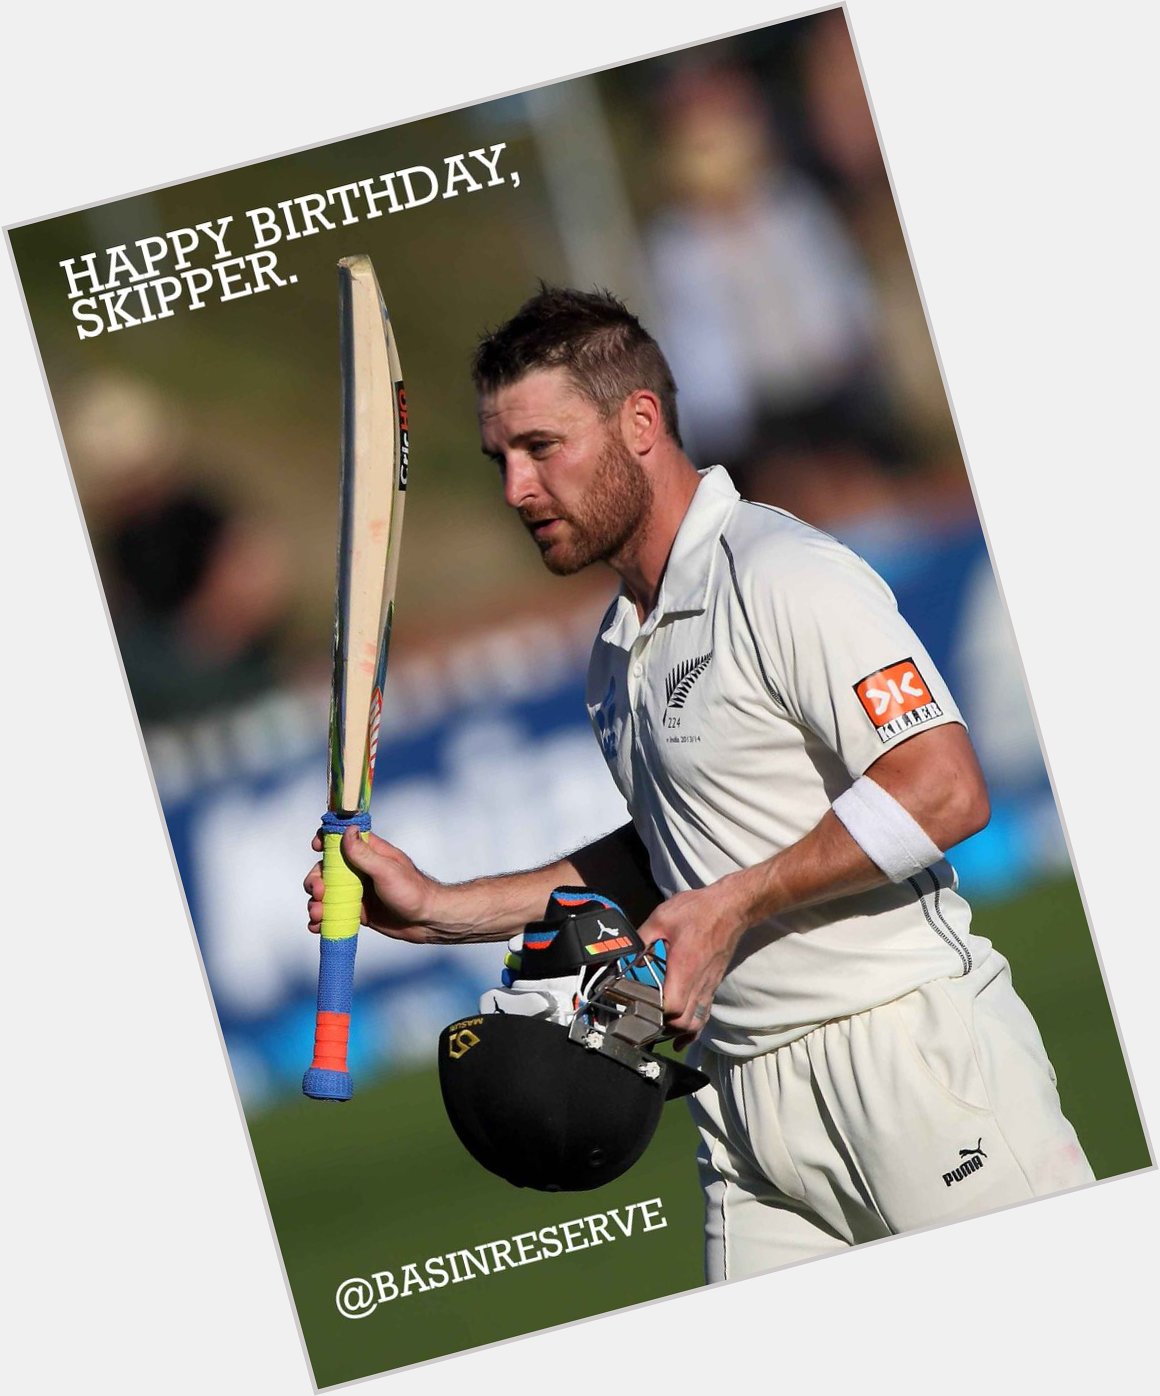 Happy Birthday to the history-making and breaking skipper, Brendon McCullum. 